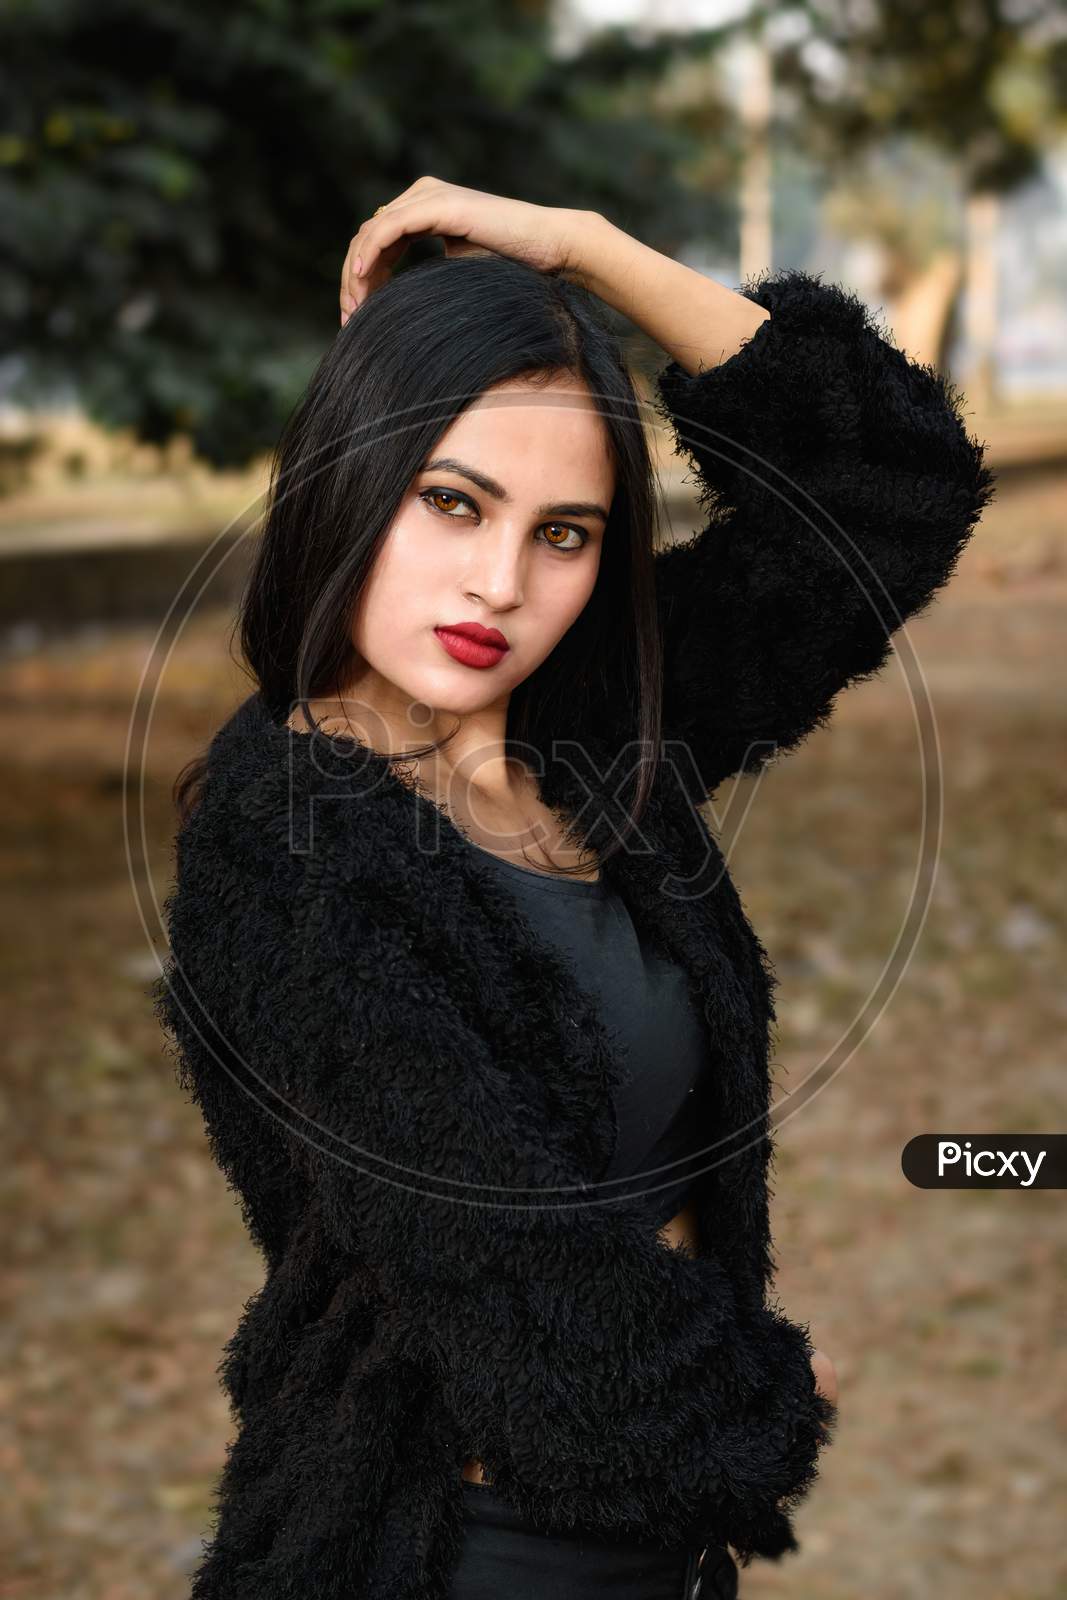 Portrait Of Very Beautiful Young Attractive Brunette Indian Woman Wearing Black Outfit Posing Fashionable In A Blurred Background. Lifestyle And Fashion.